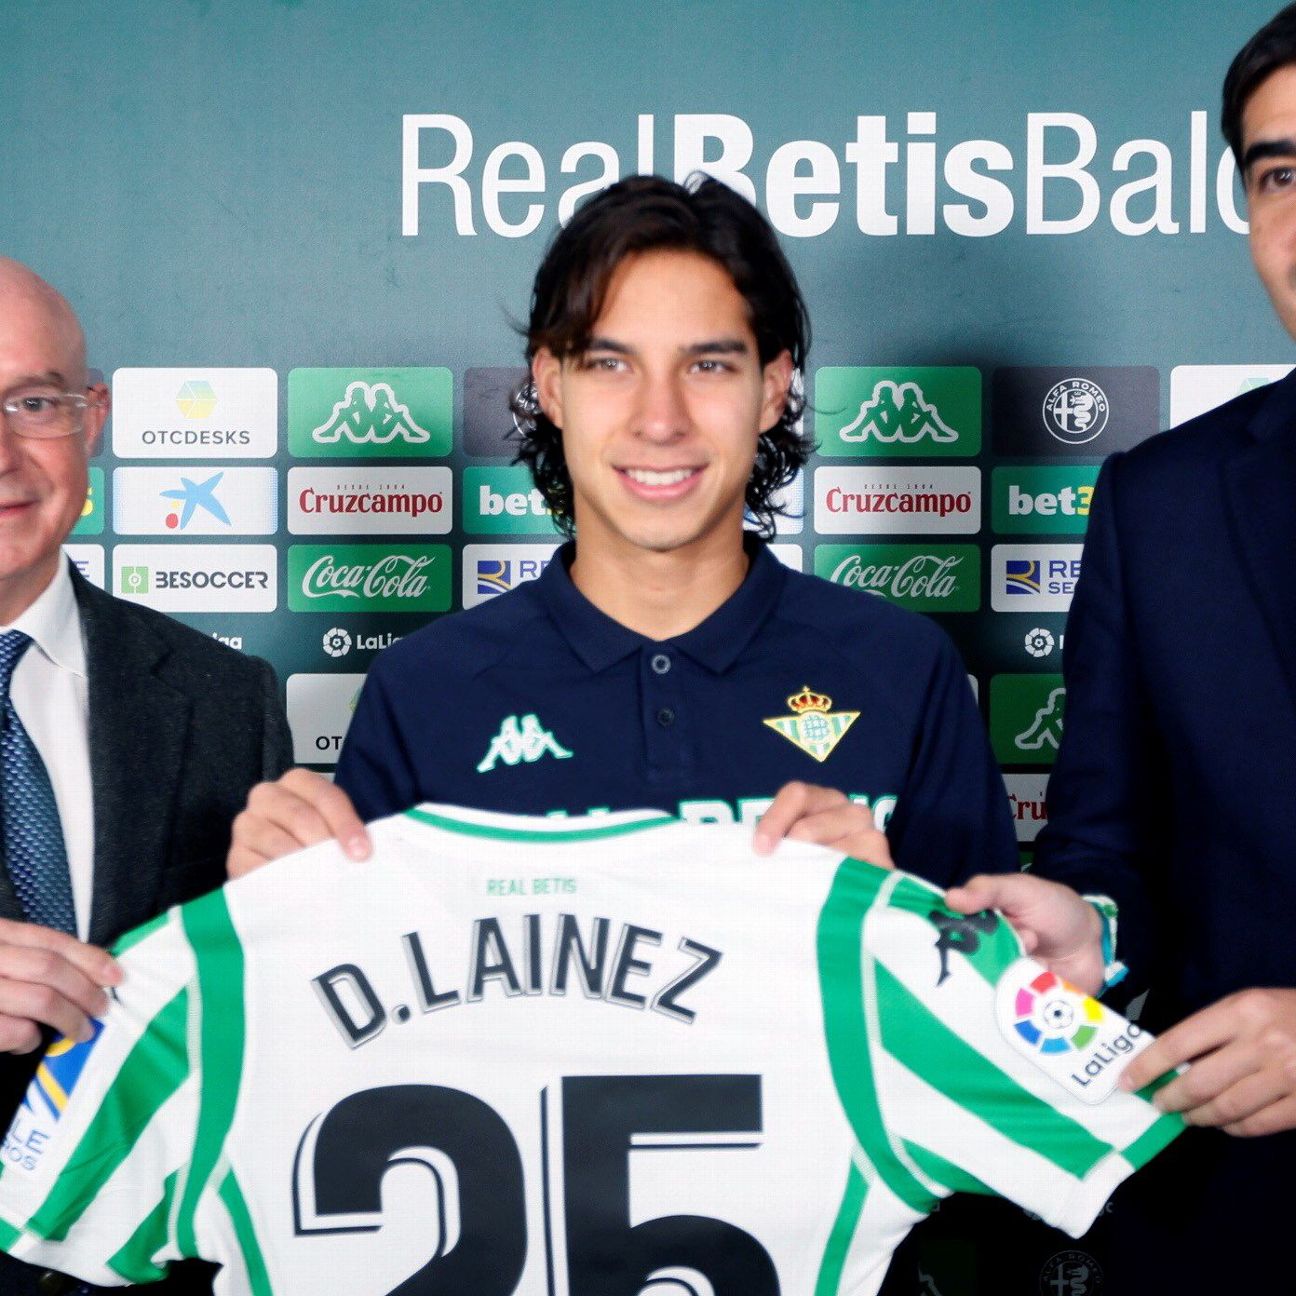 diego lainez real betis jersey